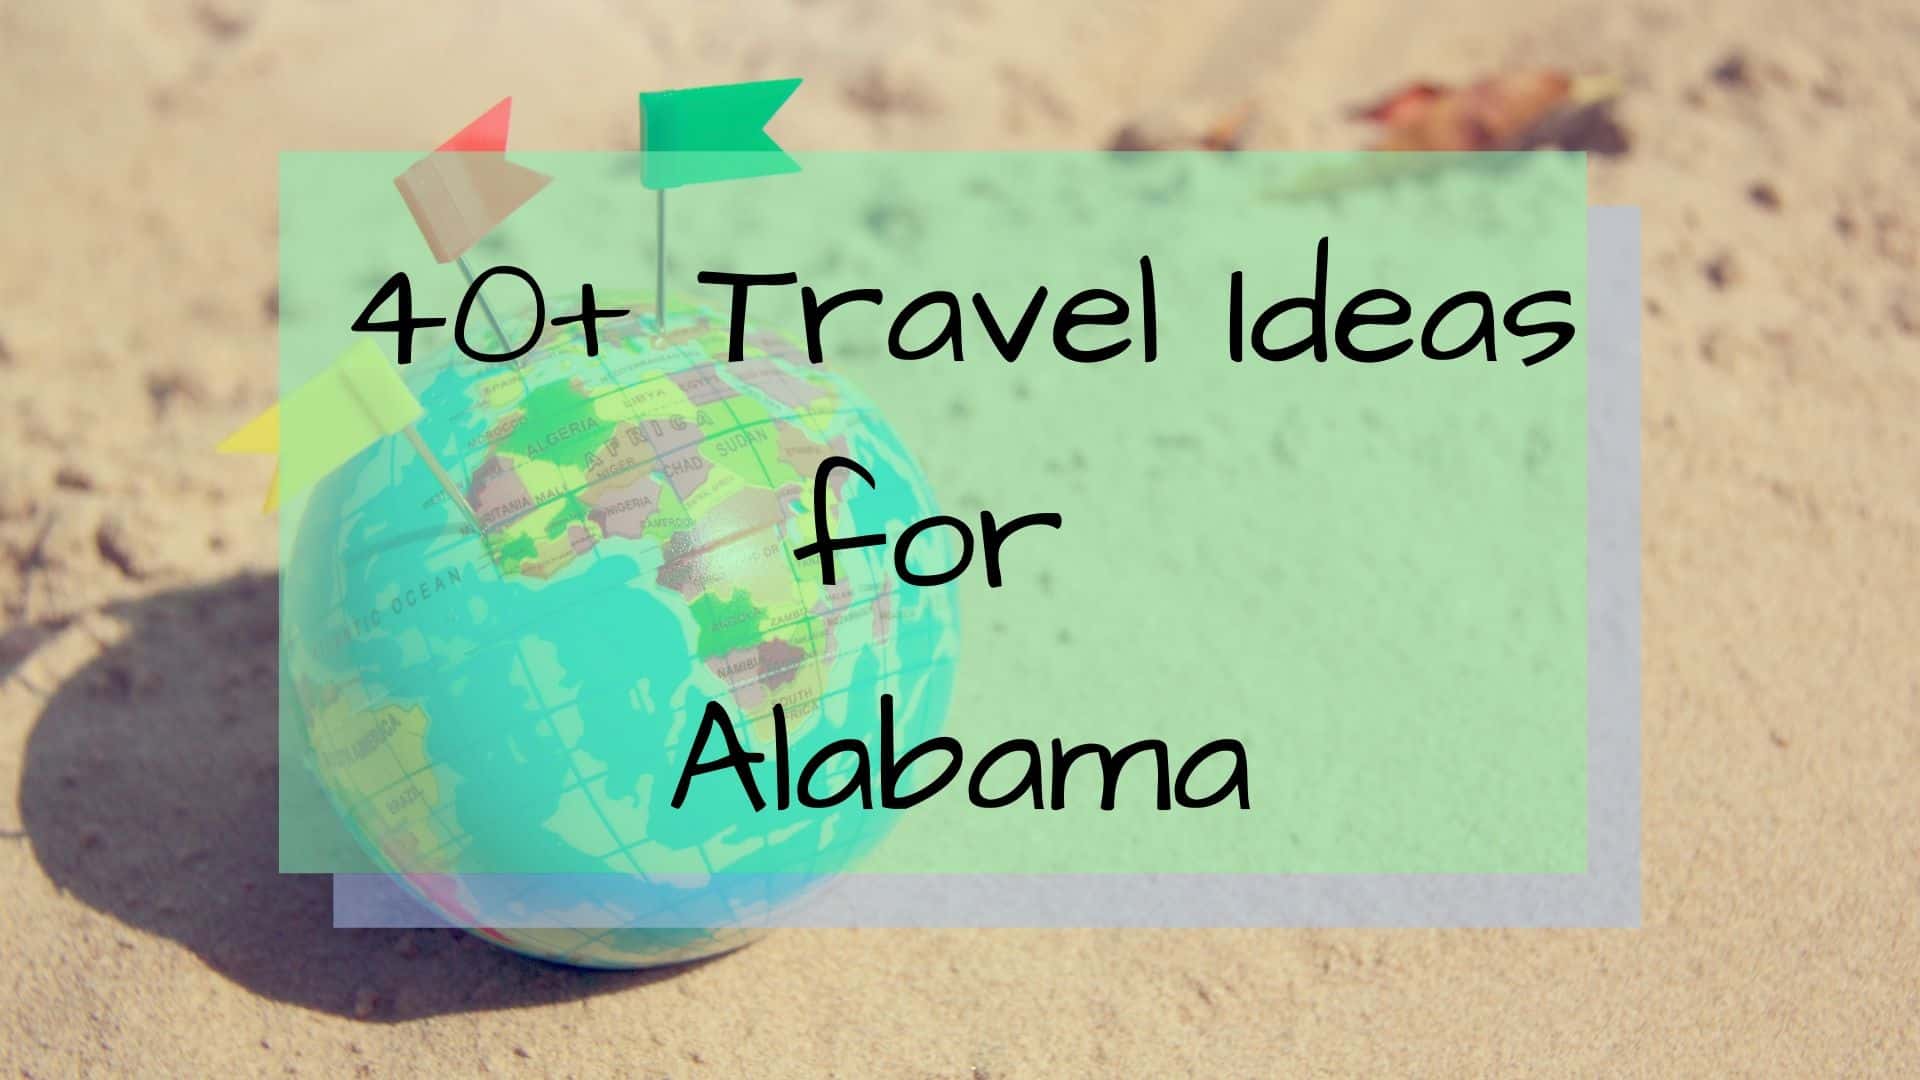 Checklist for Places to See & Things to Do in Alabama